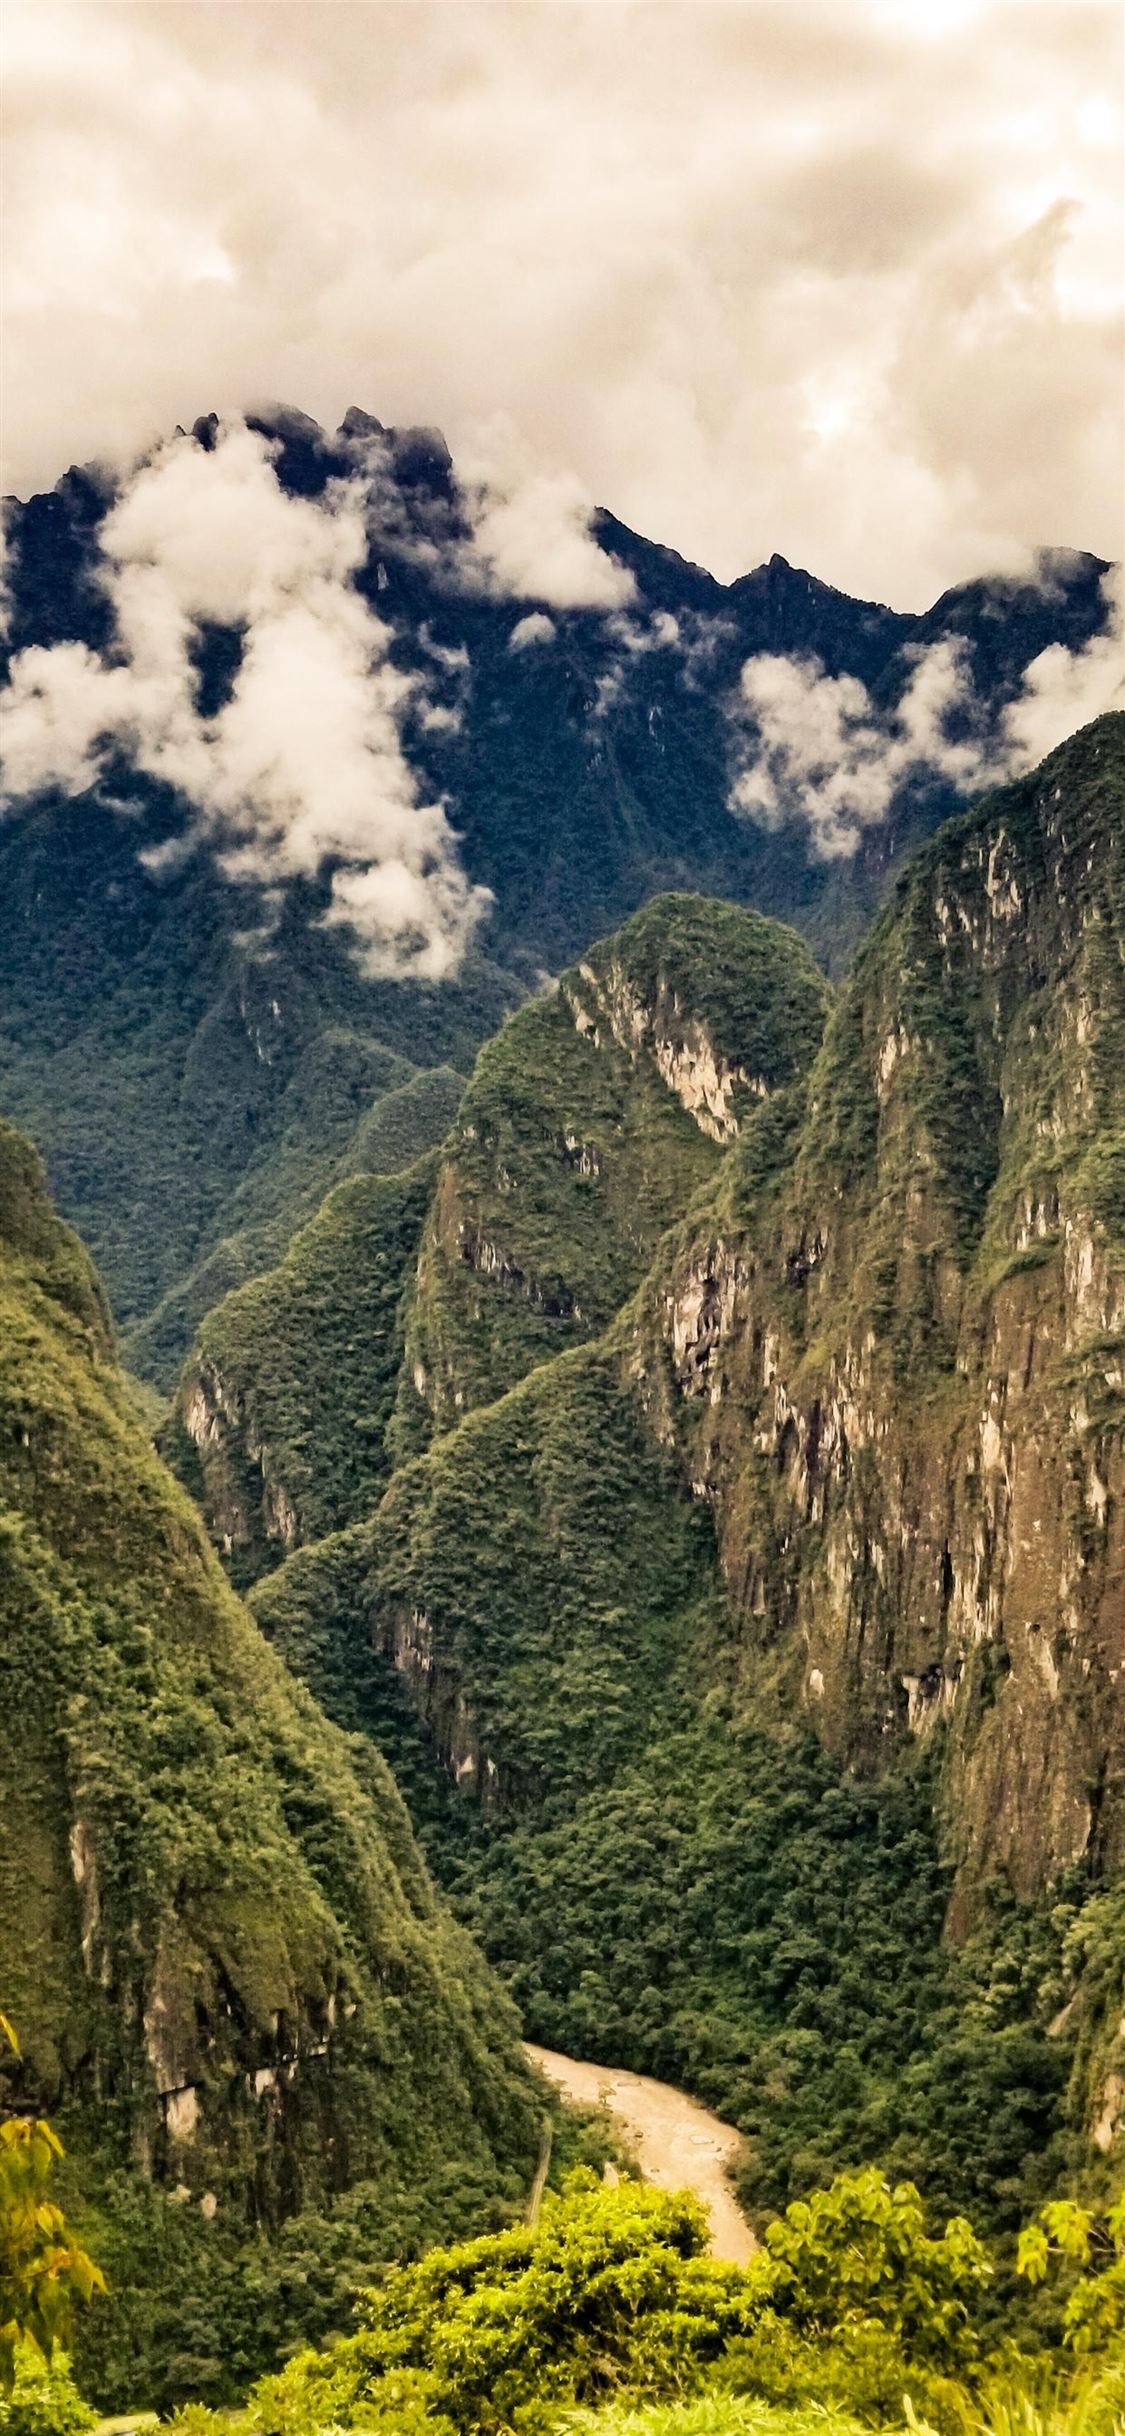 Andes mountains of Peru near Machu Picchu OC iPhone 11 Wallpaper Free Download